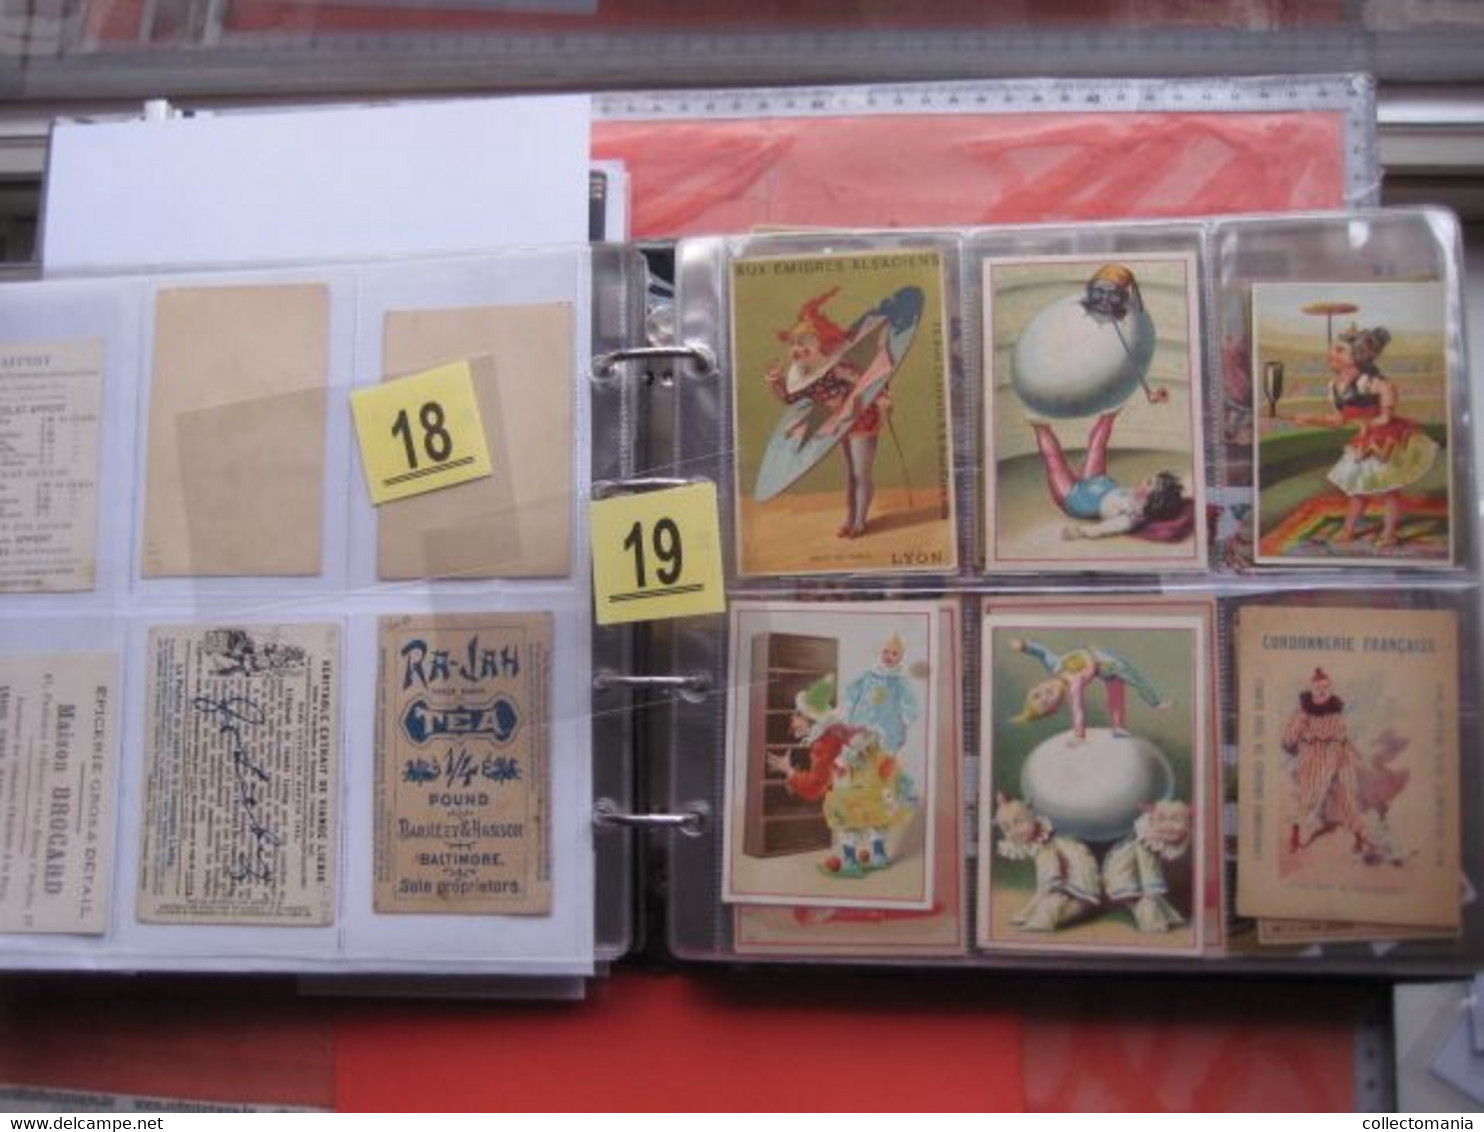 300 chromos in album, CIRCUS clowns, hand press litho cards, many PUB, nice illustrators, some  complete sets, some RRR